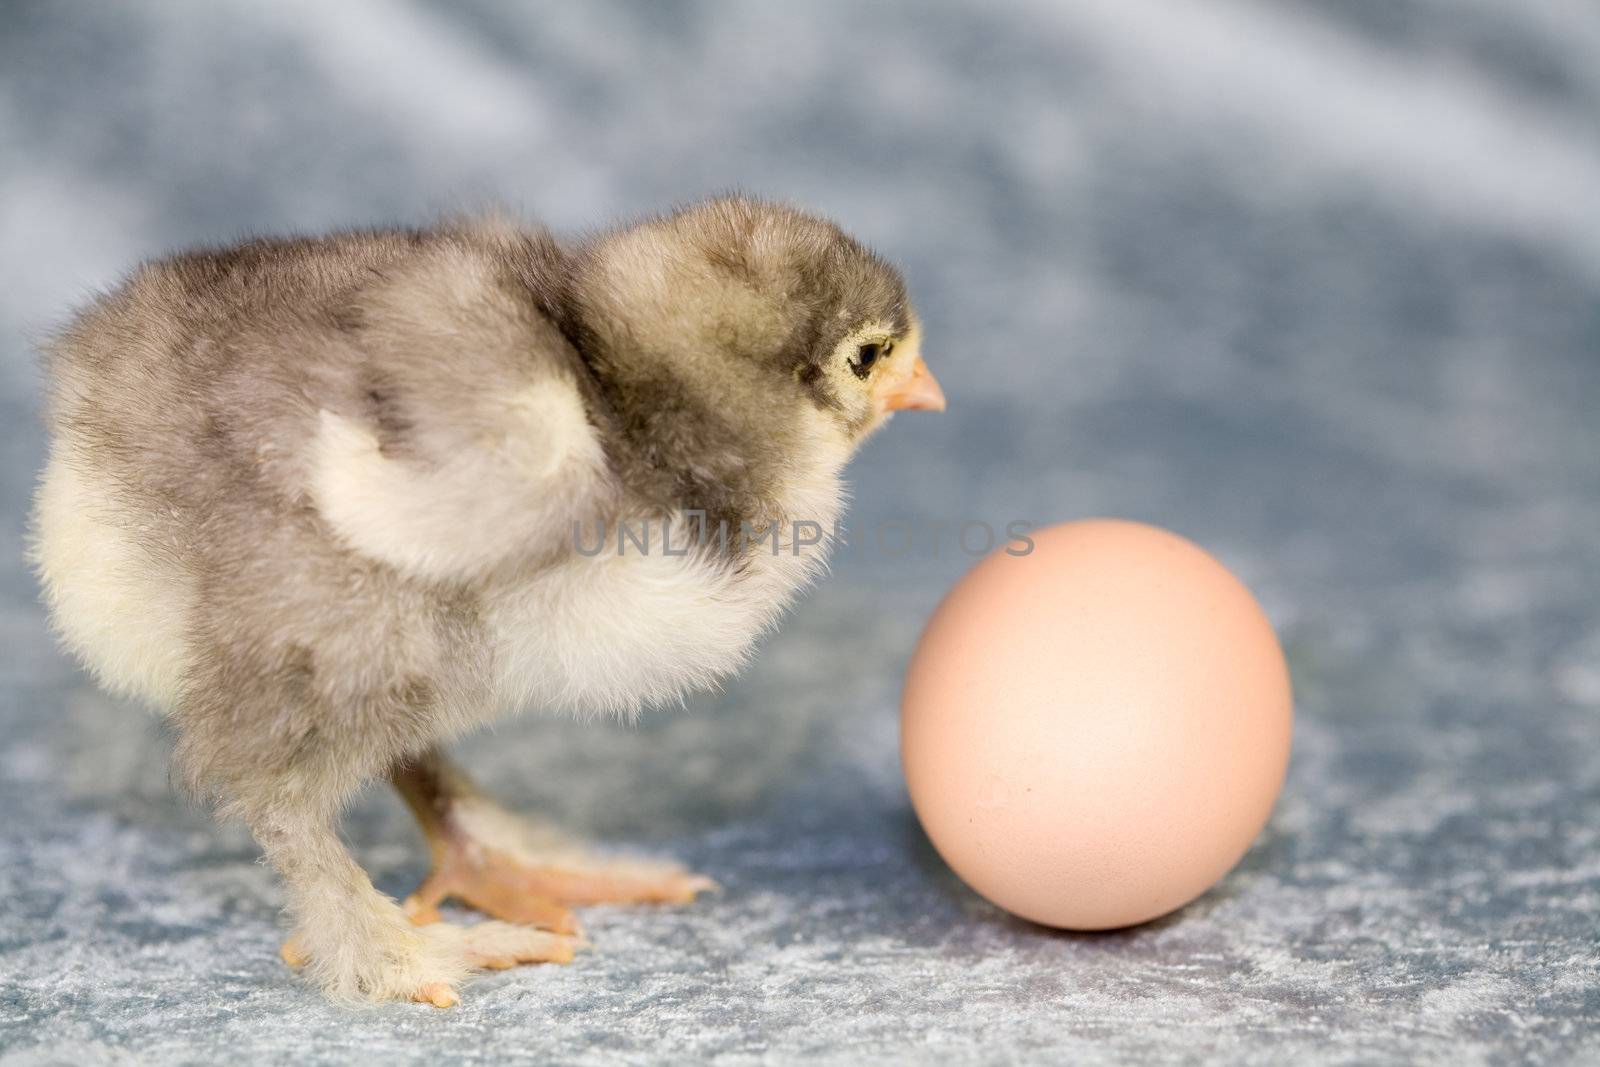 Cute little brahma chick checking out an egg